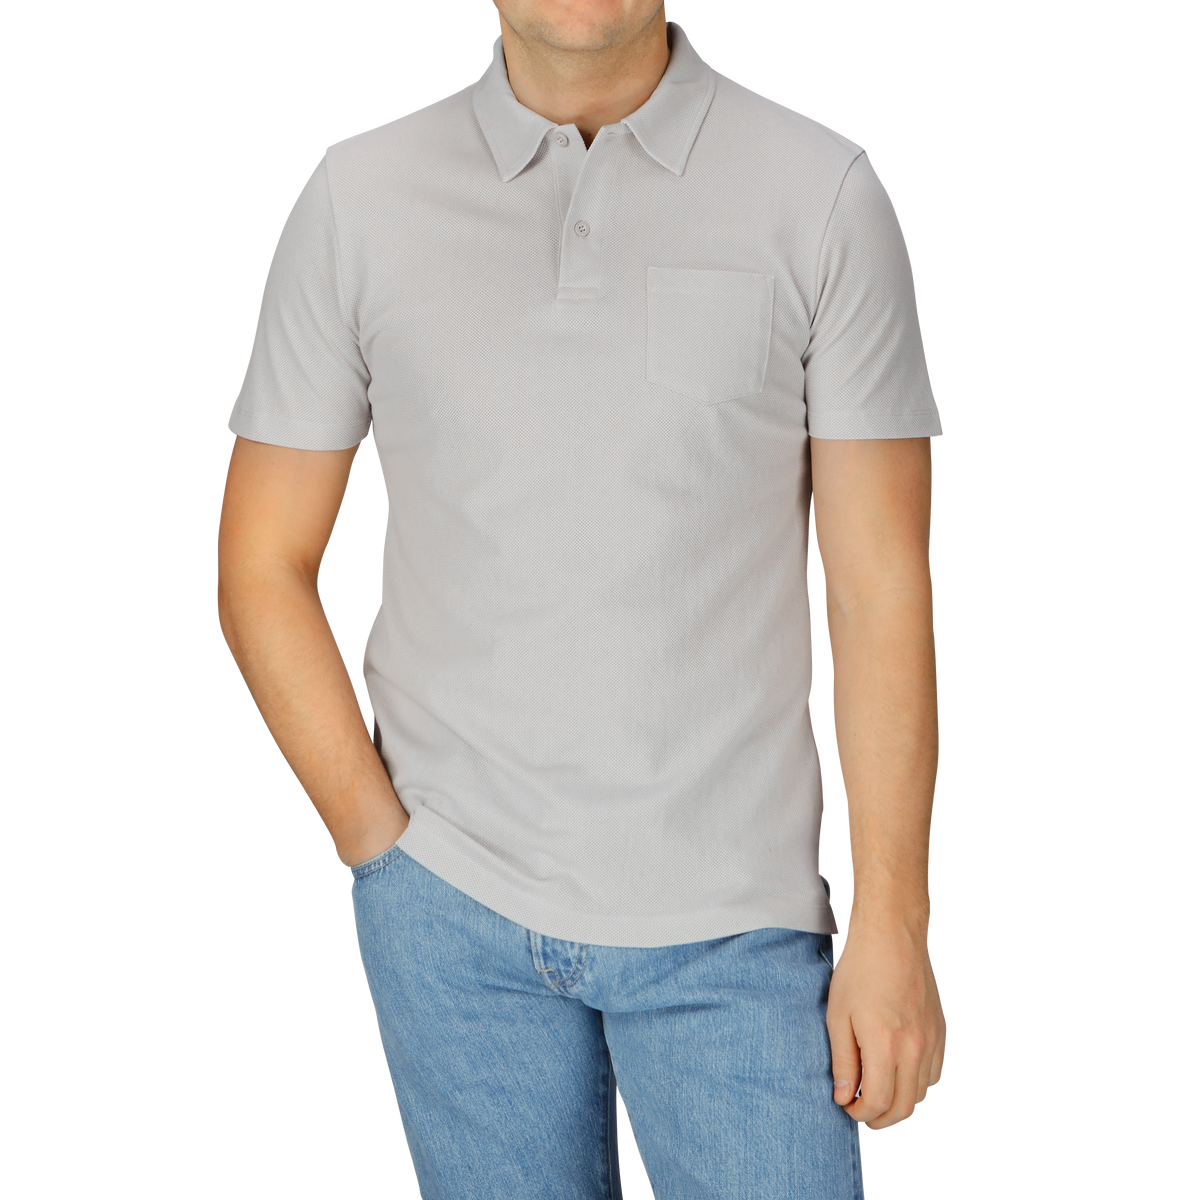 A man in a Smoke Grey Cotton Riviera Polo Shirt by Sunspel and jeans.